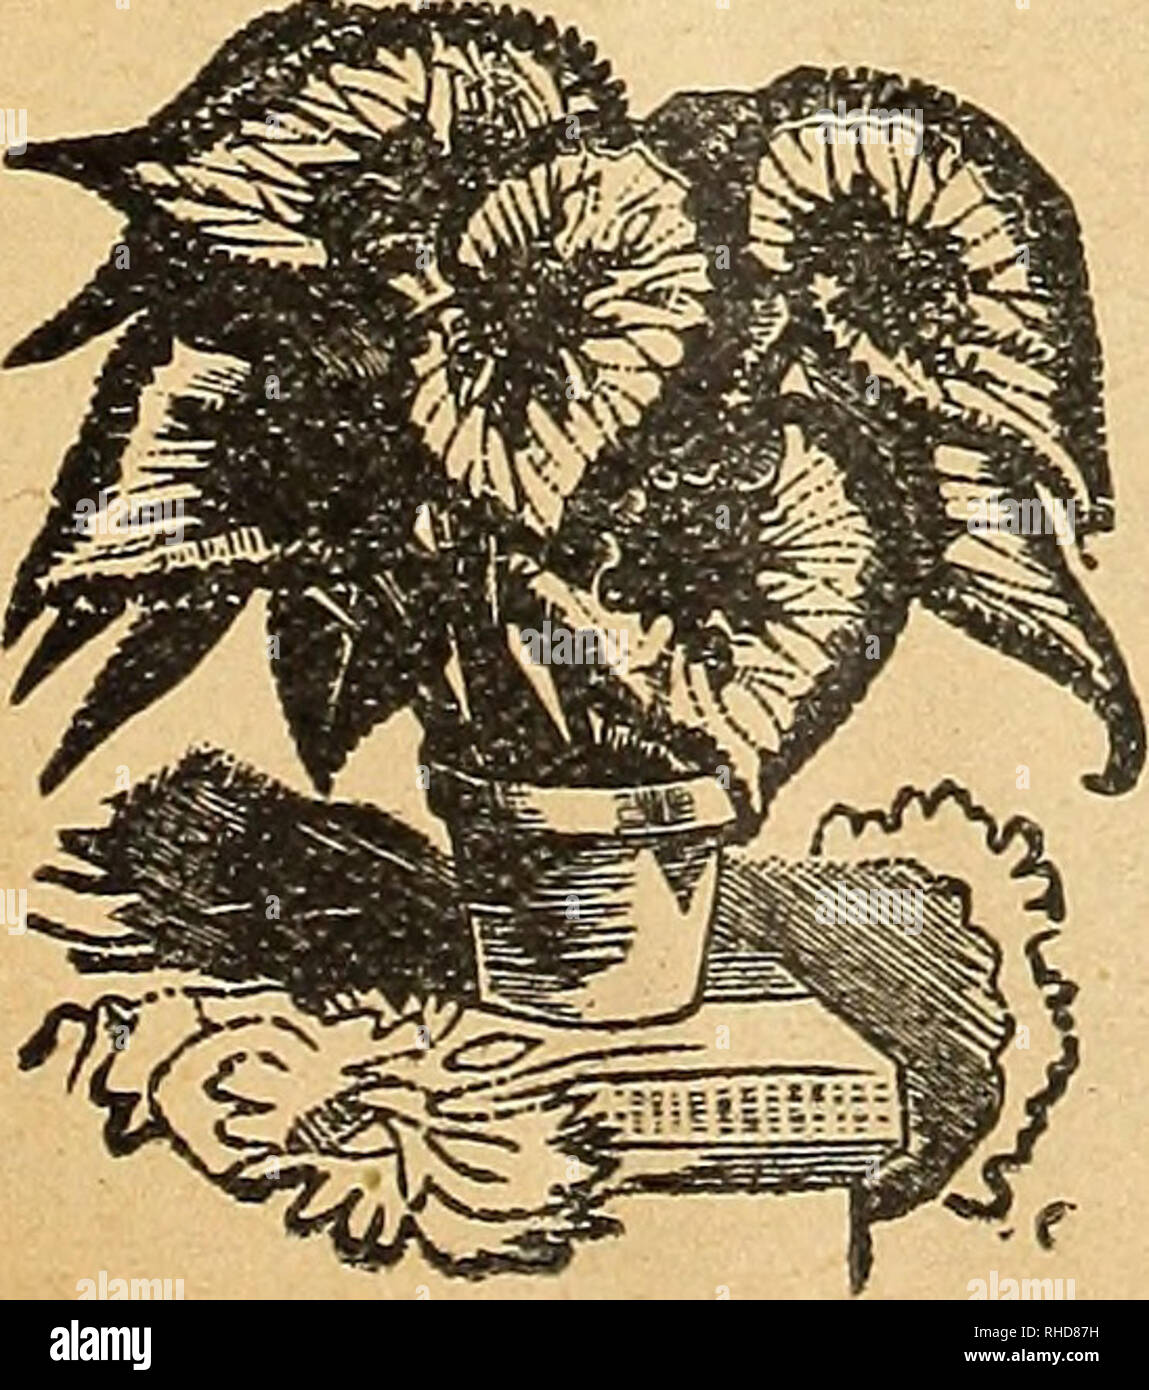 . Book of flowers from Miss Martha Hiser, seedswoman and florist. Seed industry and trade; Seeds; Flowers; Plants, Ornamental. BEAUTIFUL NEW FLOWERING BEGONIA, VESUVE Robusta—The stock, stem and under side of the leaf are la- dian red. the upper side of the leaf glossy olive green. The flowers are of a beautiful bright rose color. Rubra—Strong growing; heavy waxen leaves; coral colored flowers in panicles as large as your hand. Price, 10 cts. Sanderson.ii—Coral Begonia. The flowers are of a scarlet shade of crimson, borne in profusion. I/eaves slightly edged with scarlet. Price, 10 cents. Thur Stock Photo